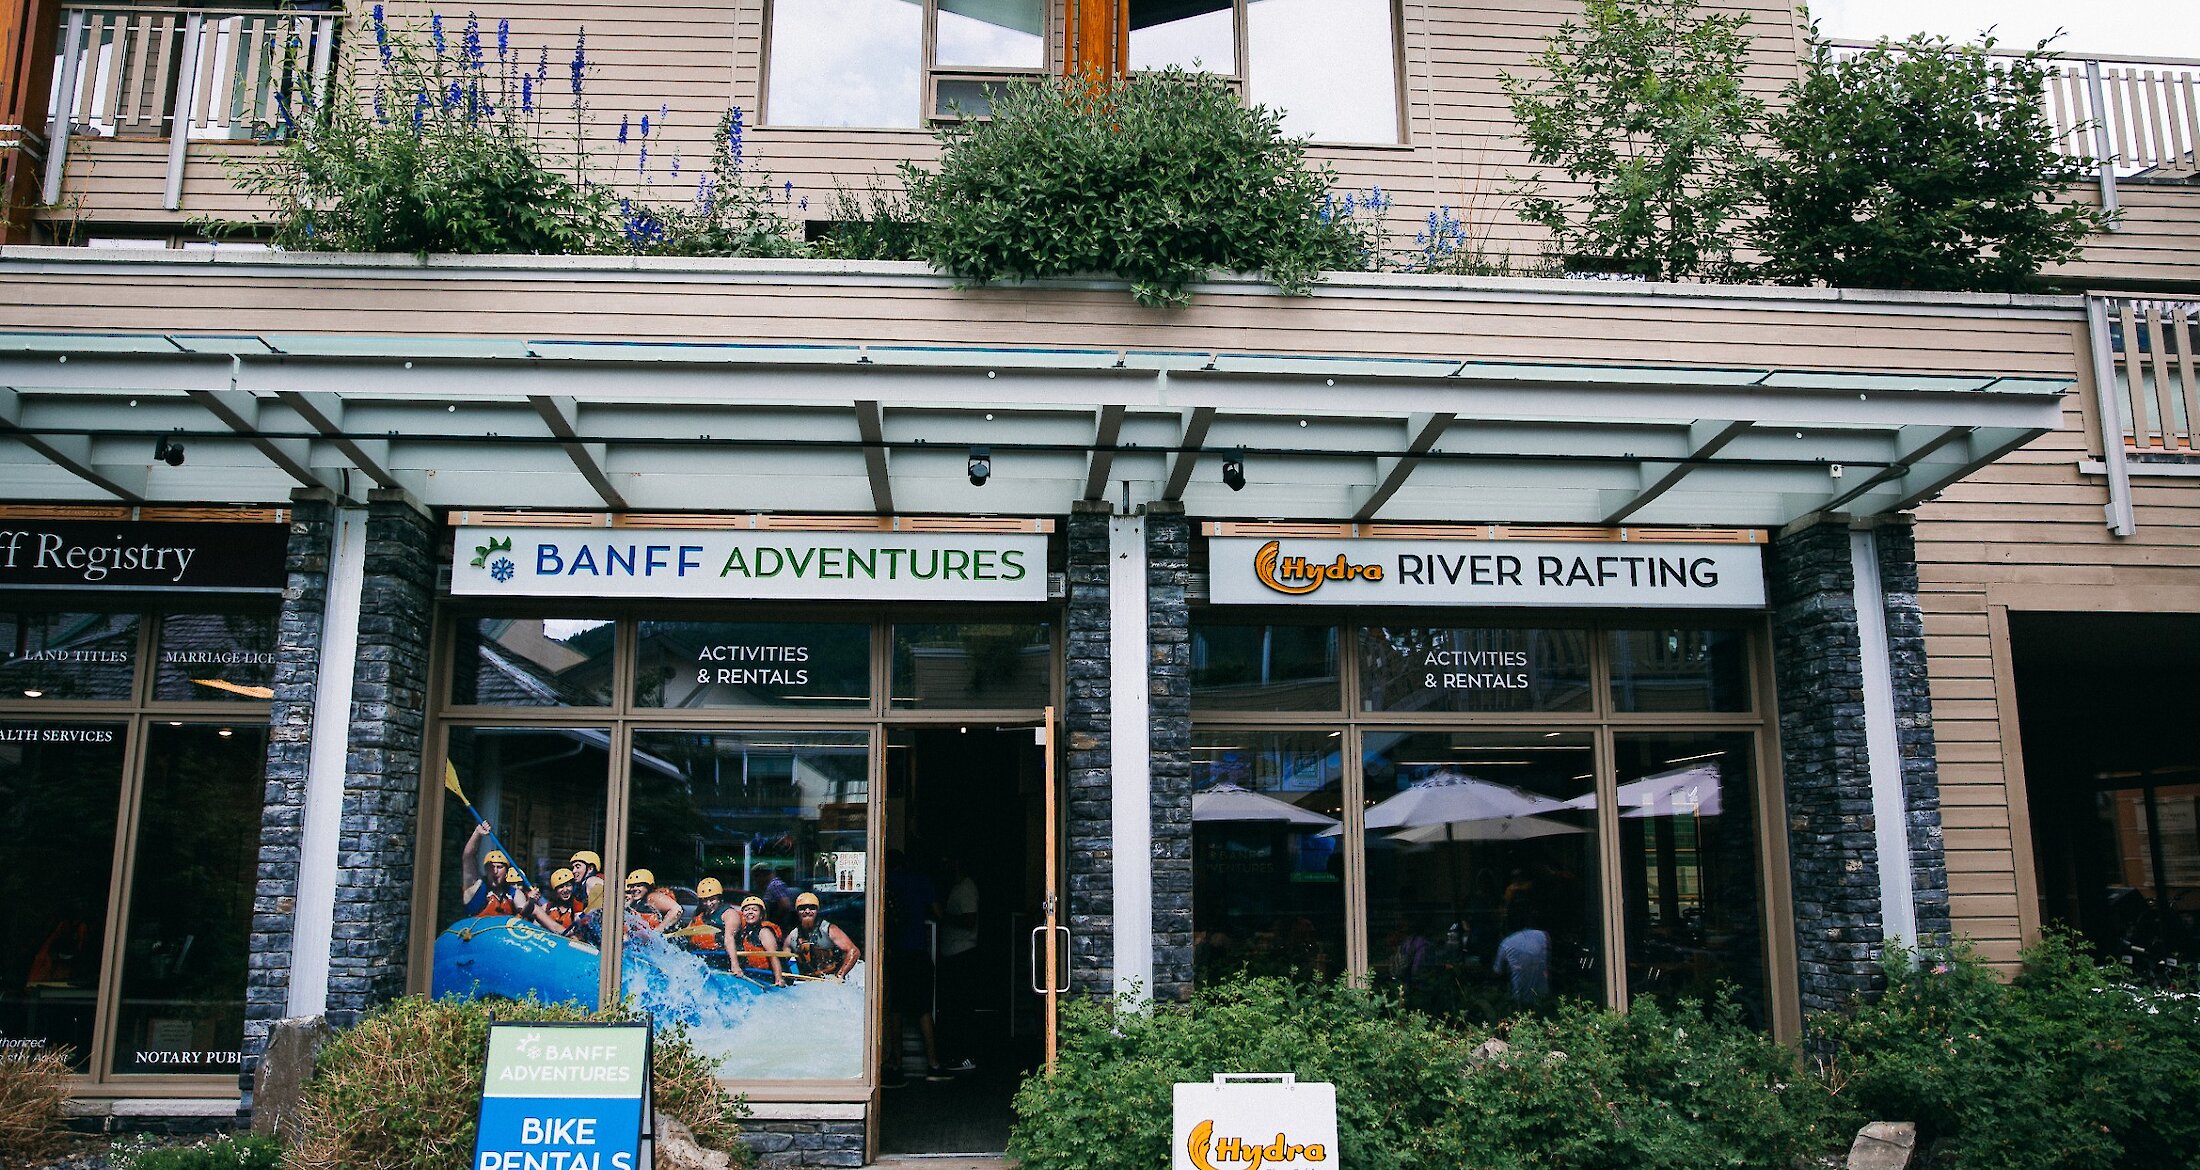 Banff Adventures store located at 211 Bear Street